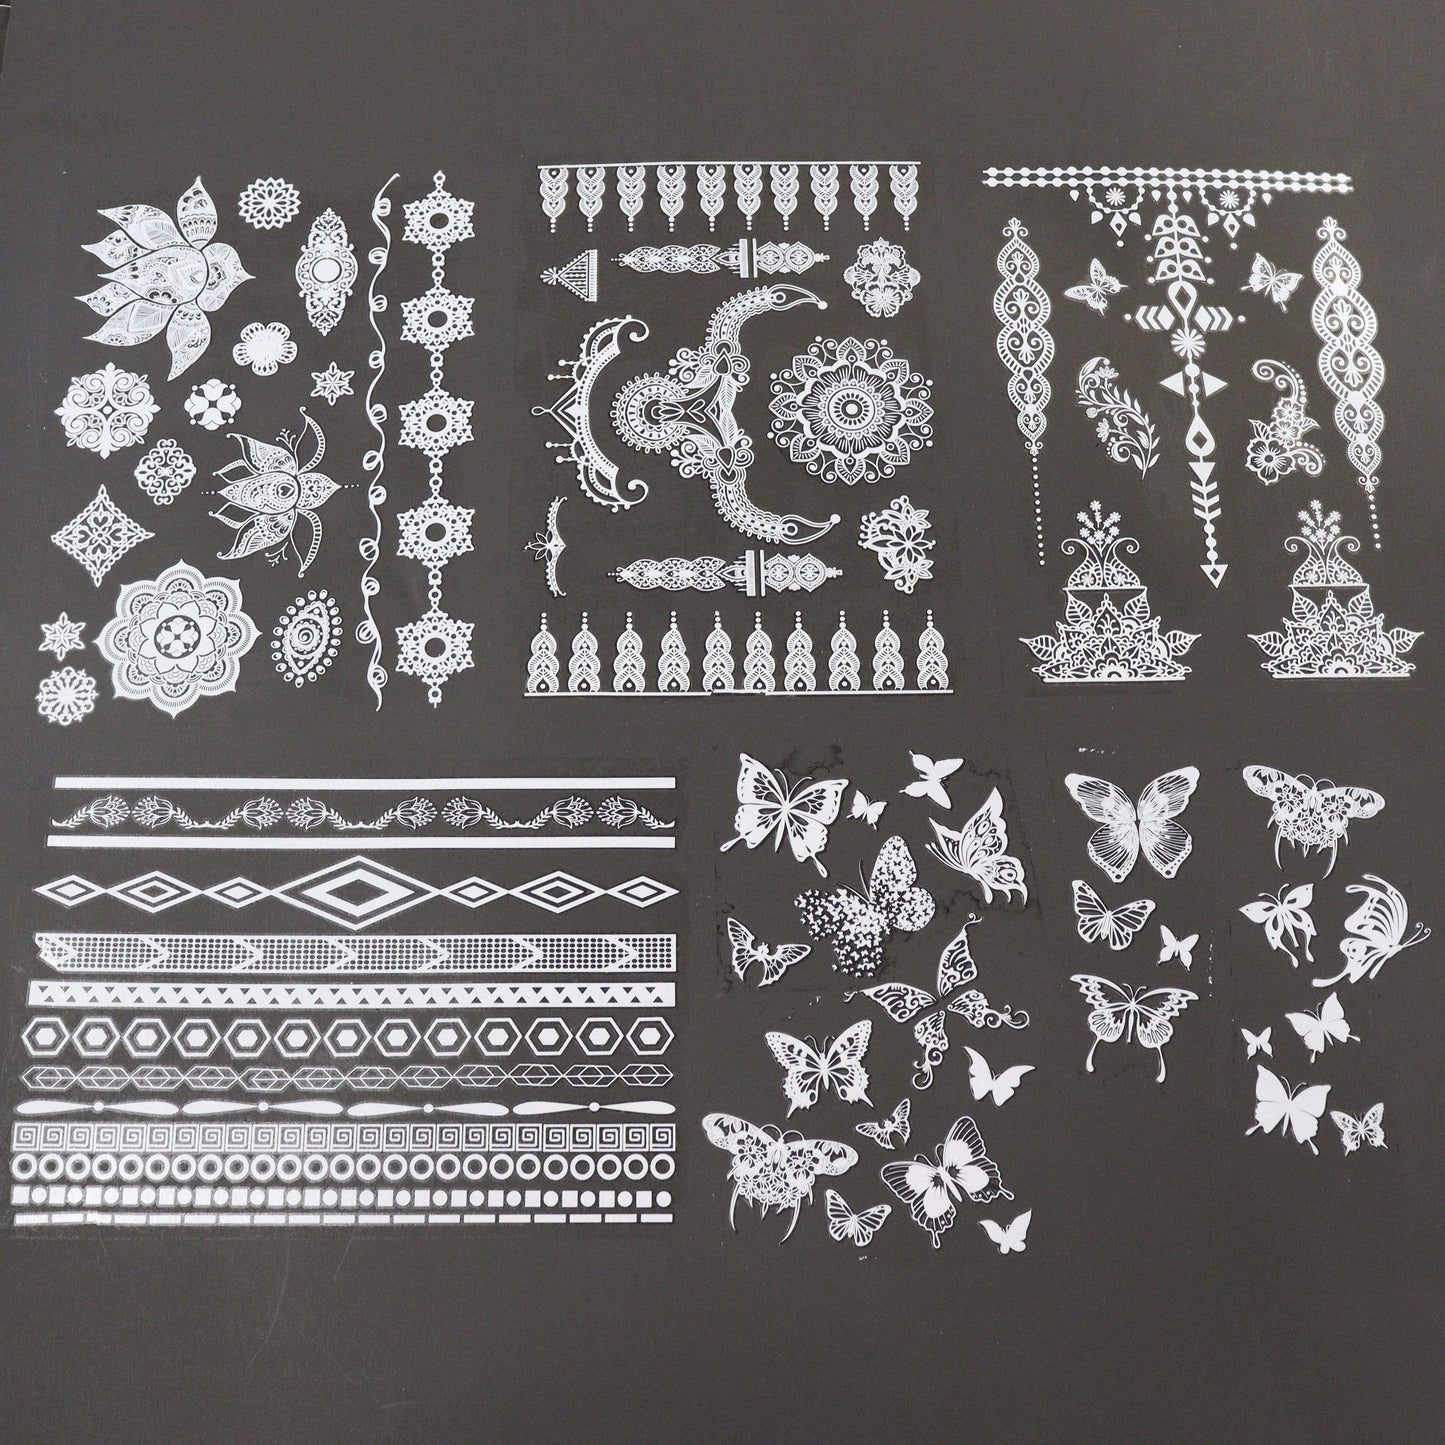 Temporary Tattoo Set - High Quality and Long-Lasting